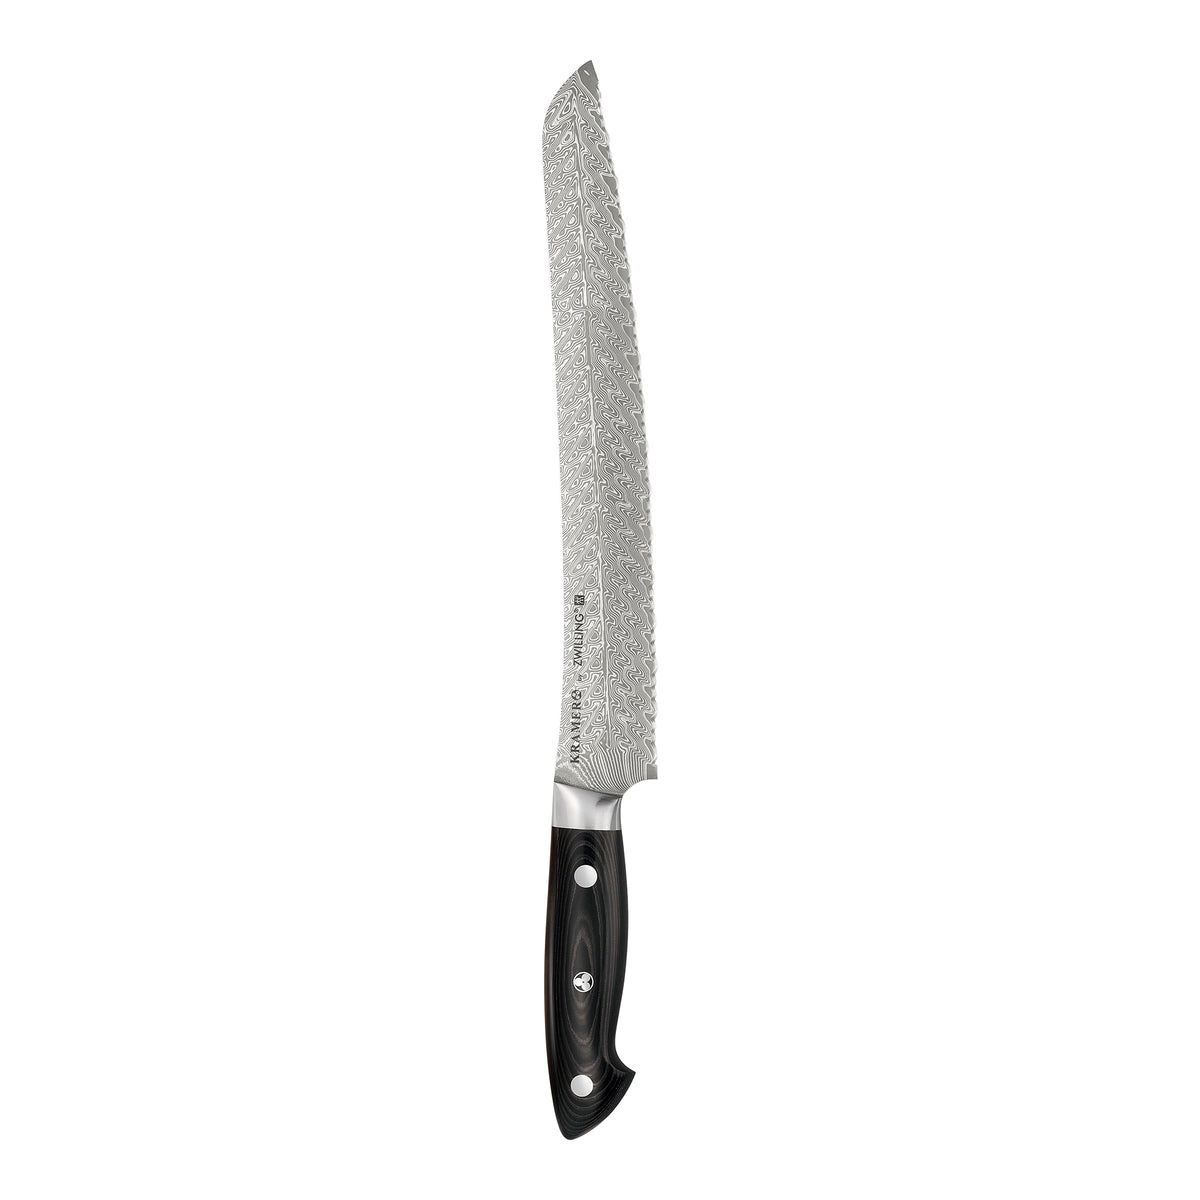 Kramer By Zwilling Euroline Damascus Collection 9-Inch Bread Knife